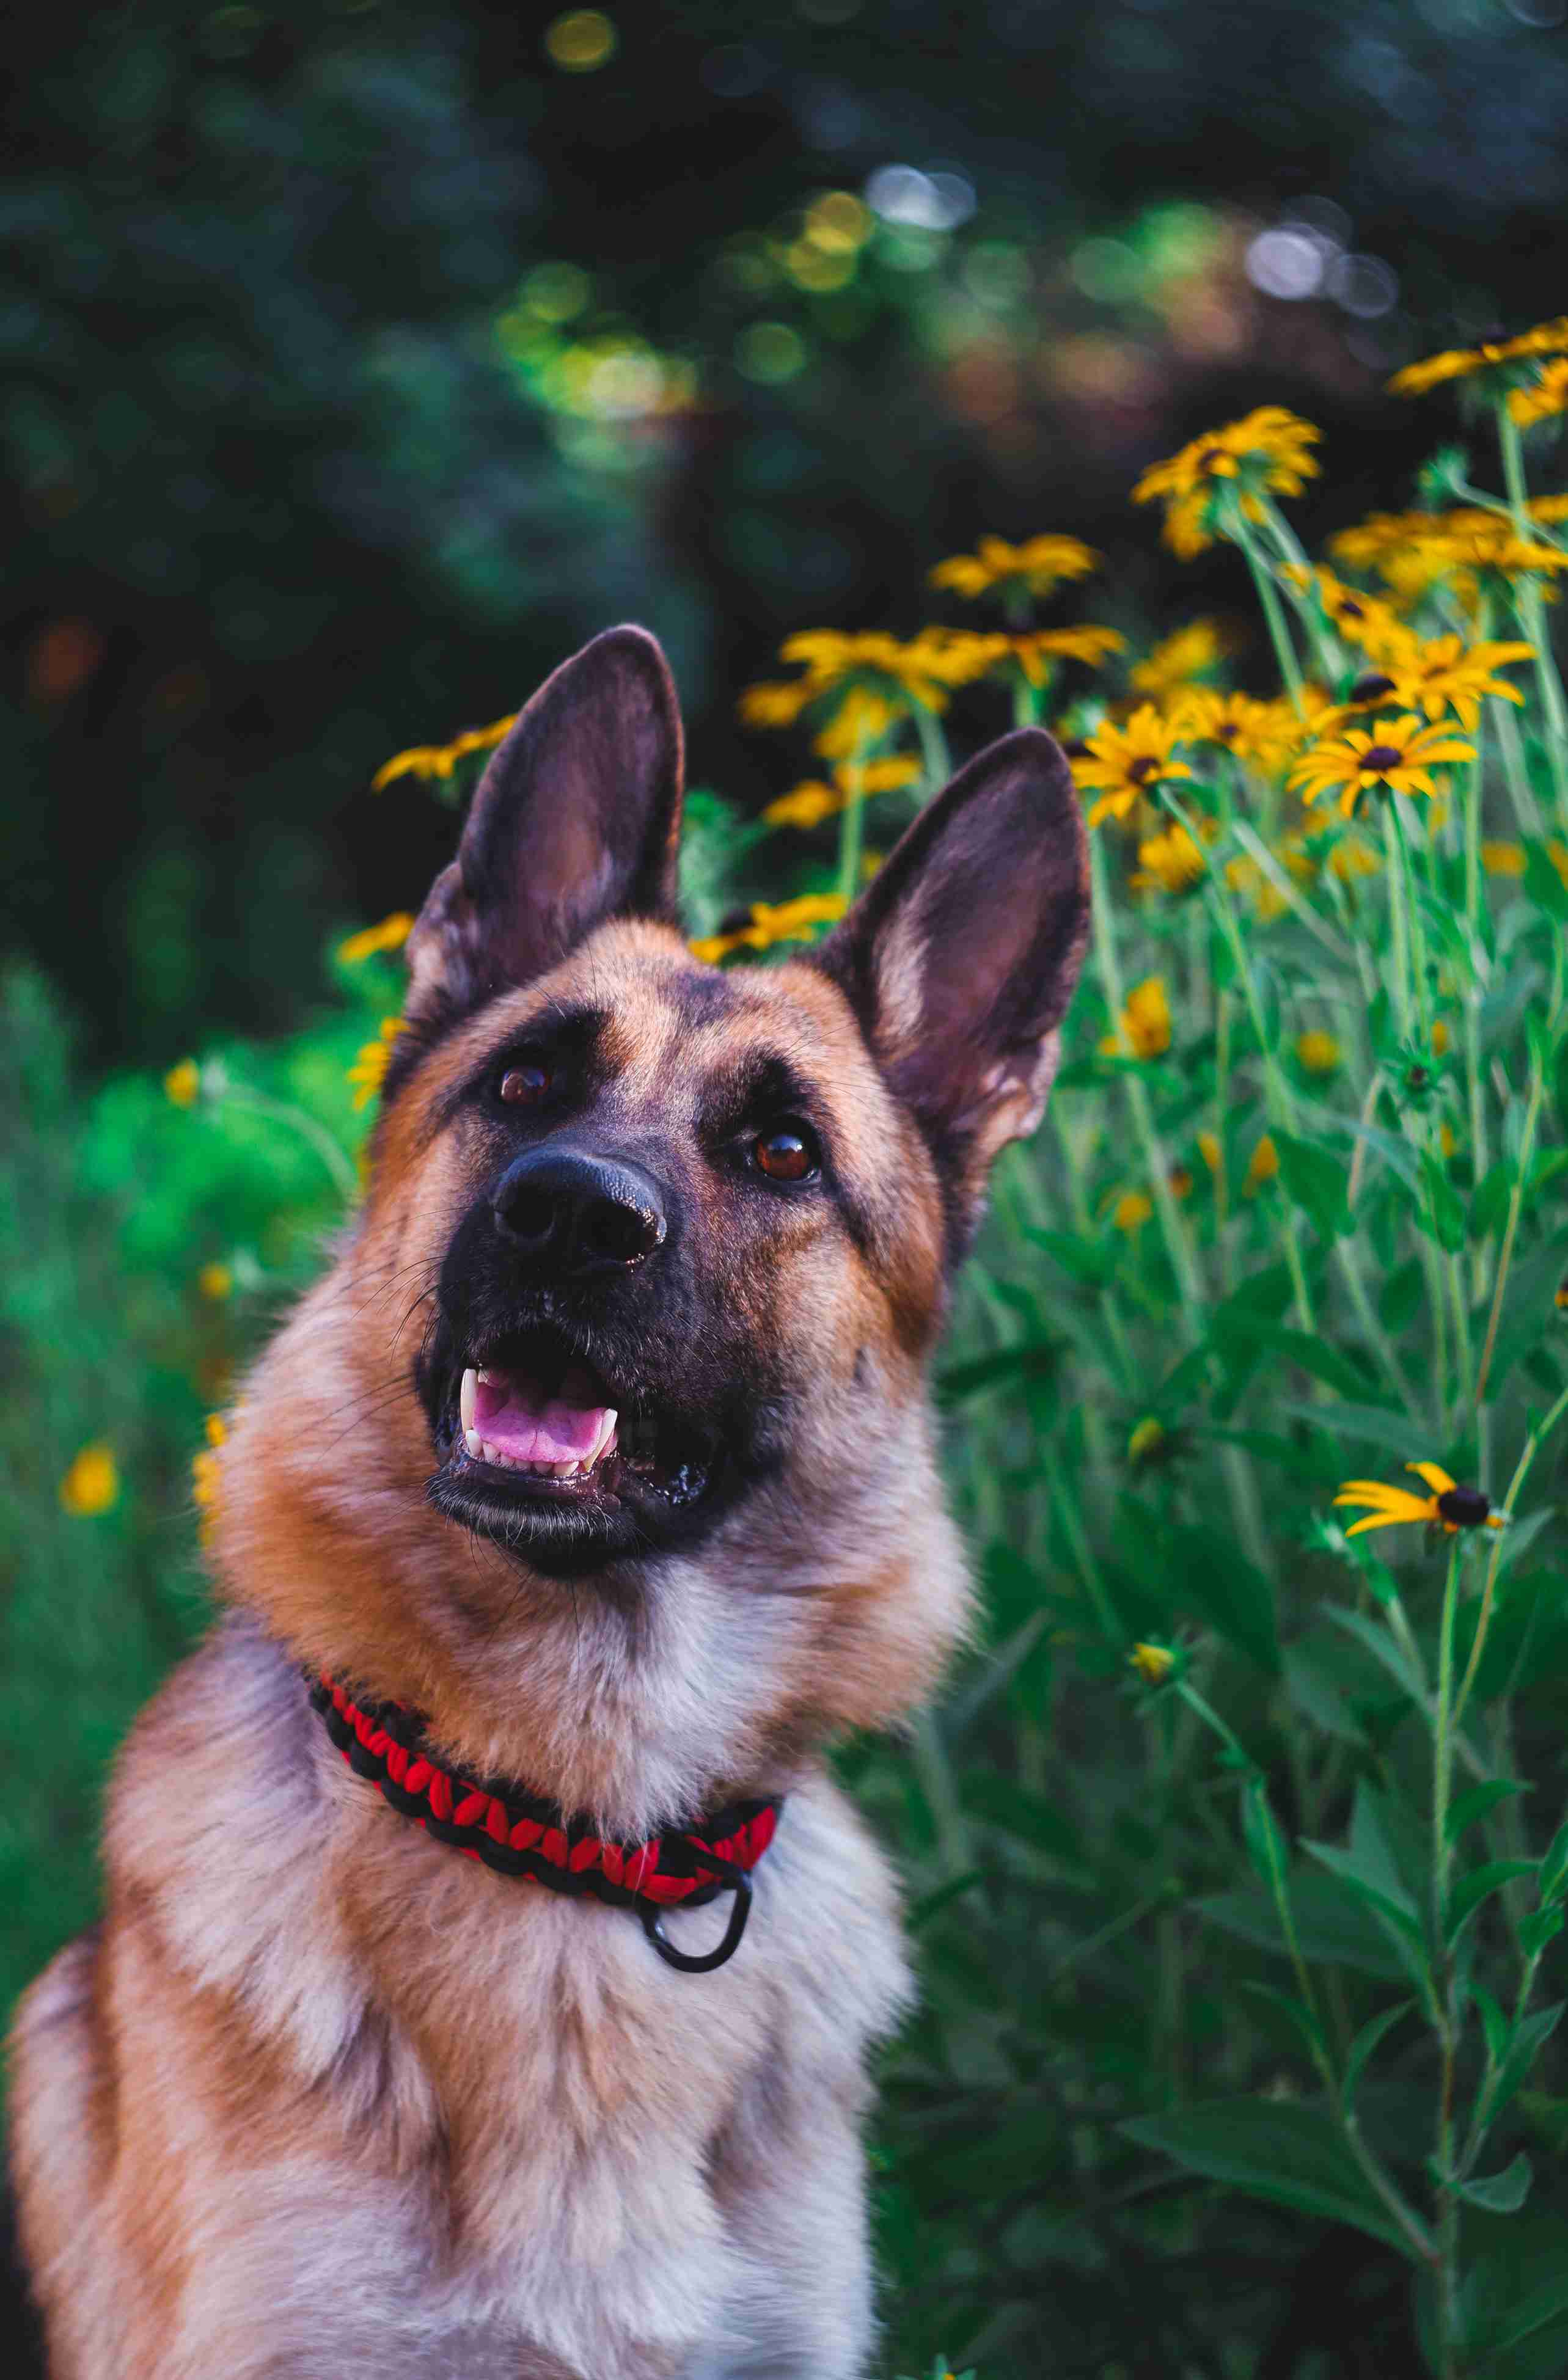 How do you choose a reputable breeder for a German shepherd?